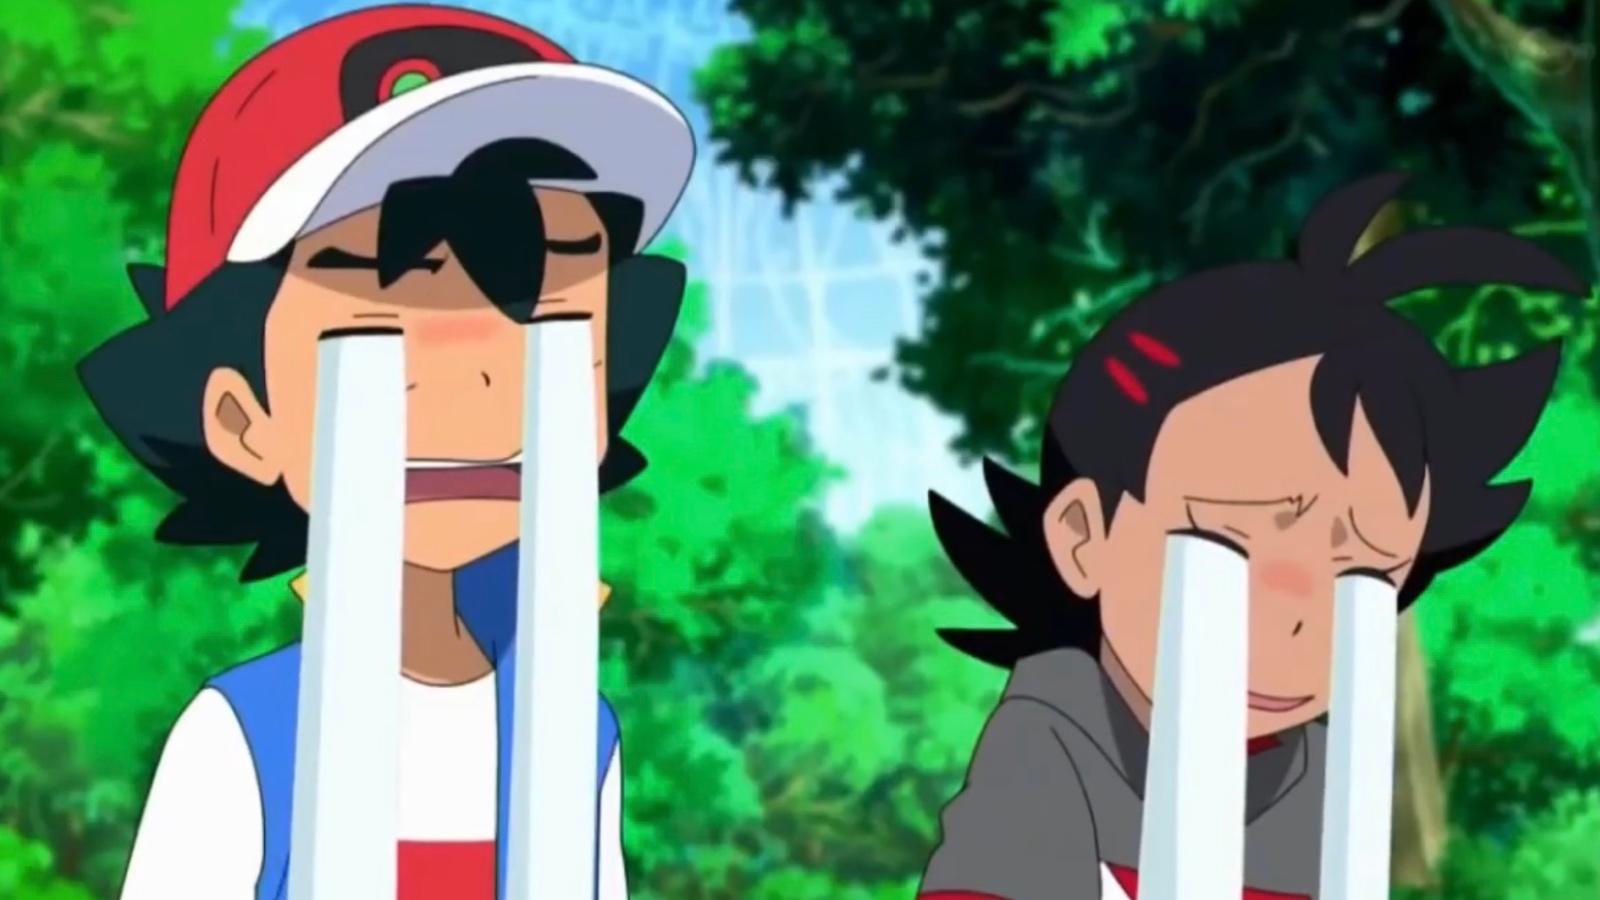 Pokemon goes down after the goodbye of Ash in the anime